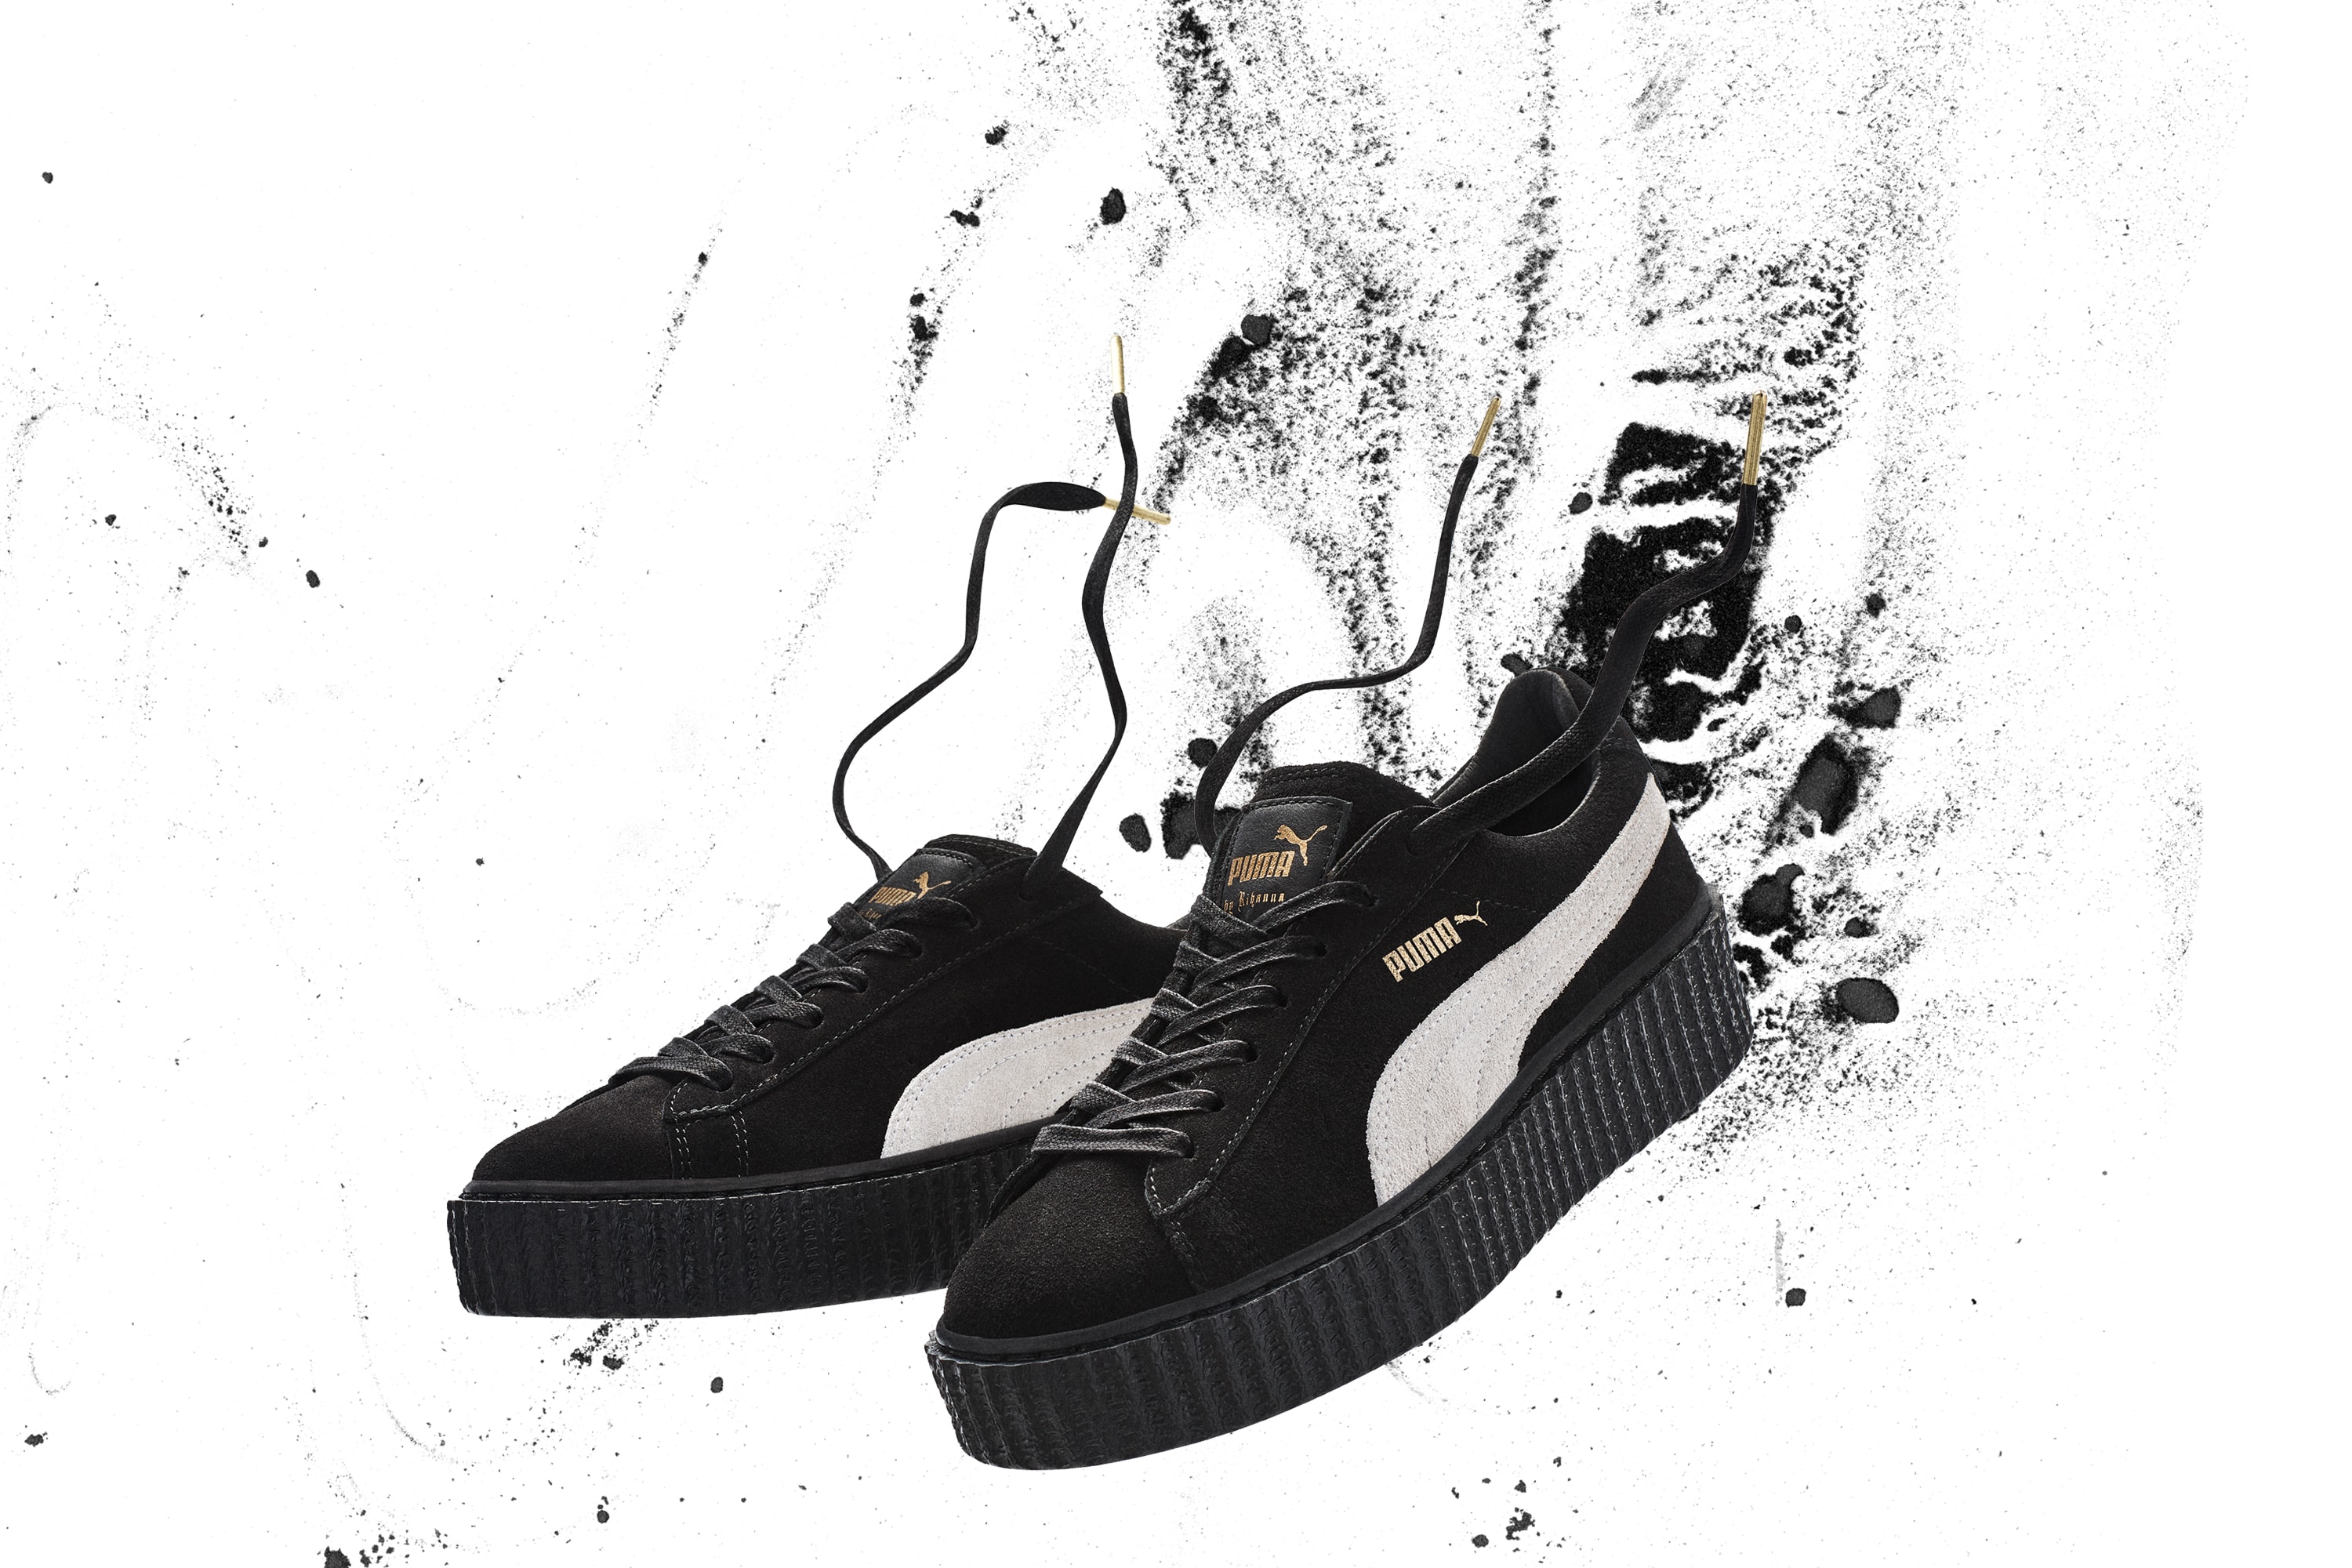 The FENTY BY RIHANNA x PUMA SUEDE CREEPER will release in Taiwan on September 29